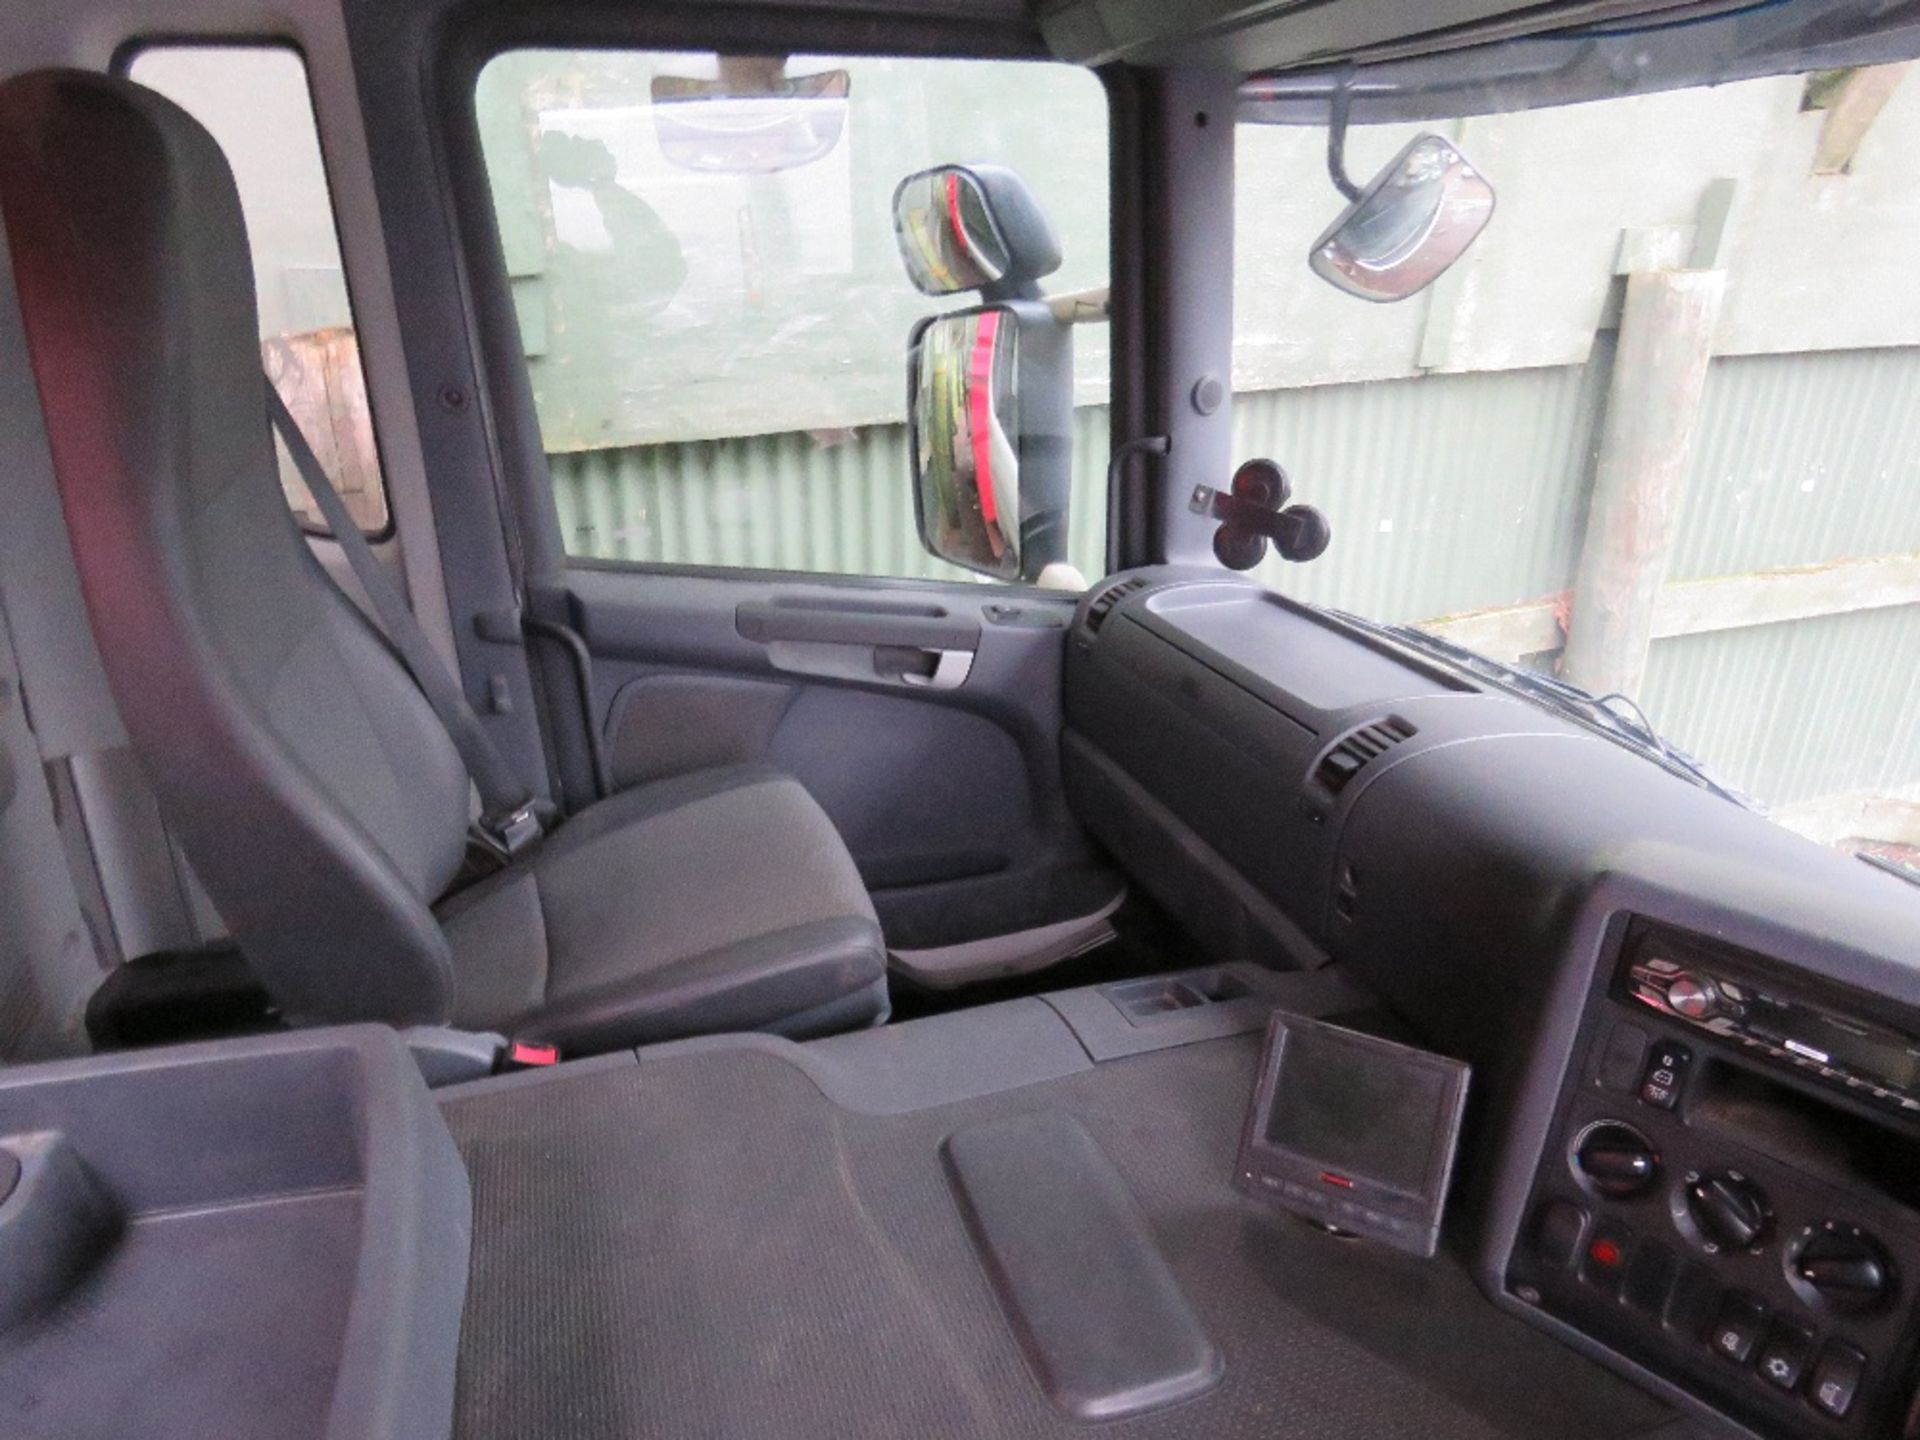 SCANIA P400 8X4 TIPPER LORRY REG:KM62 EHX. SEMI AUTO GEARBOX. 2013 REGISTERED. TESTED TILL MARCH 202 - Image 8 of 12